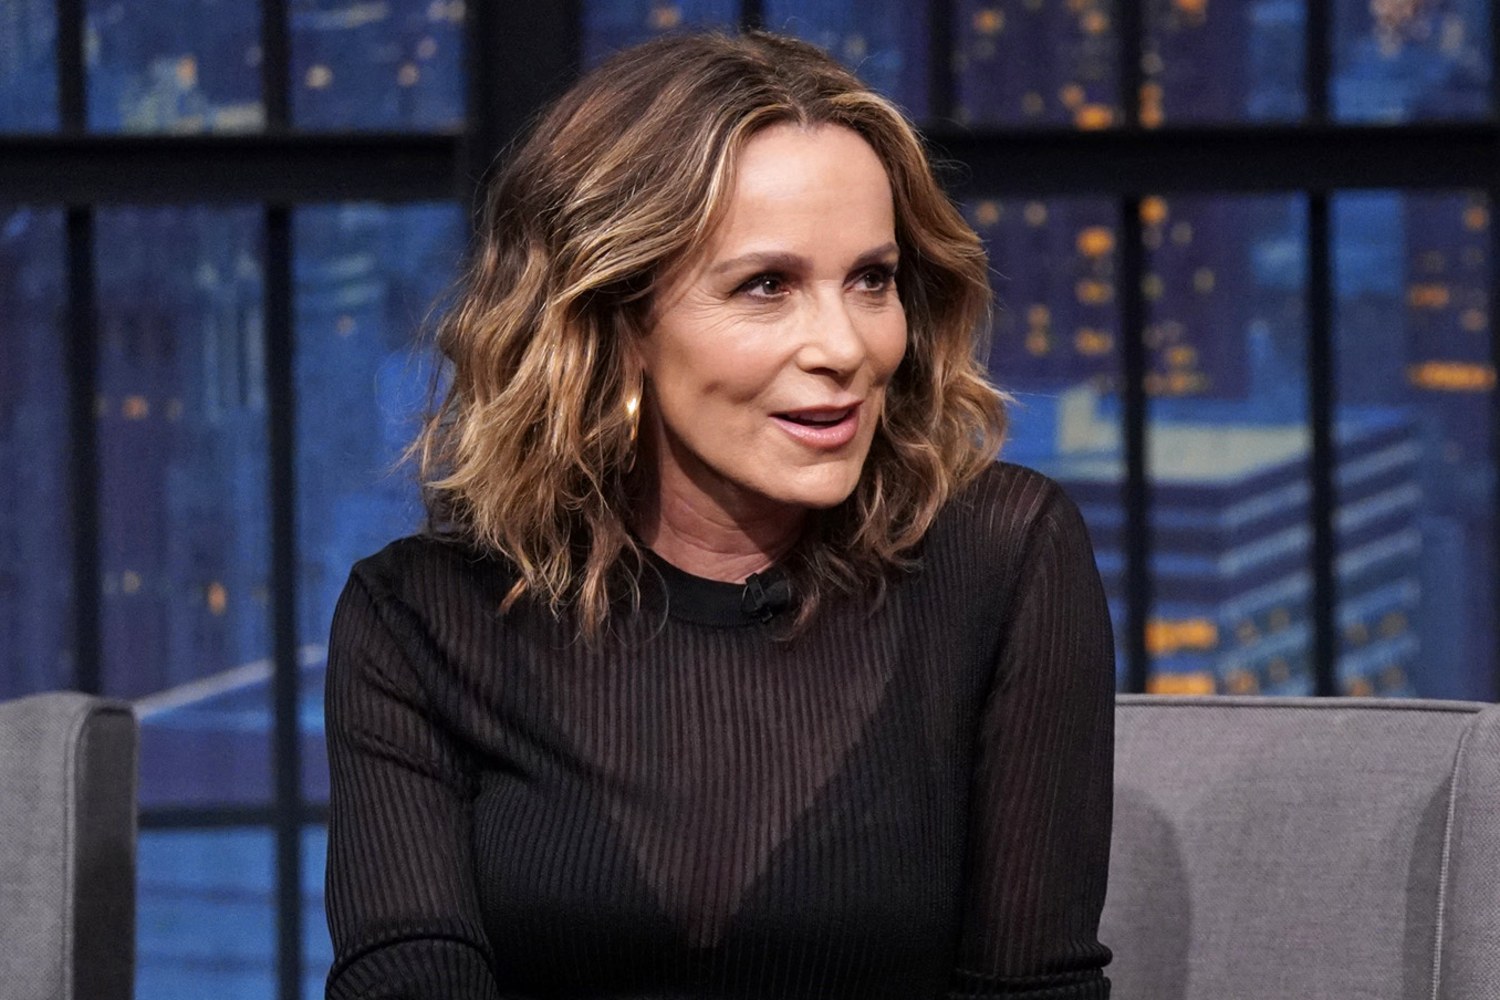 Jennifer Grey of 'Dirty Dancing' opens up about plastic surgery in book  "Out of the Corner."